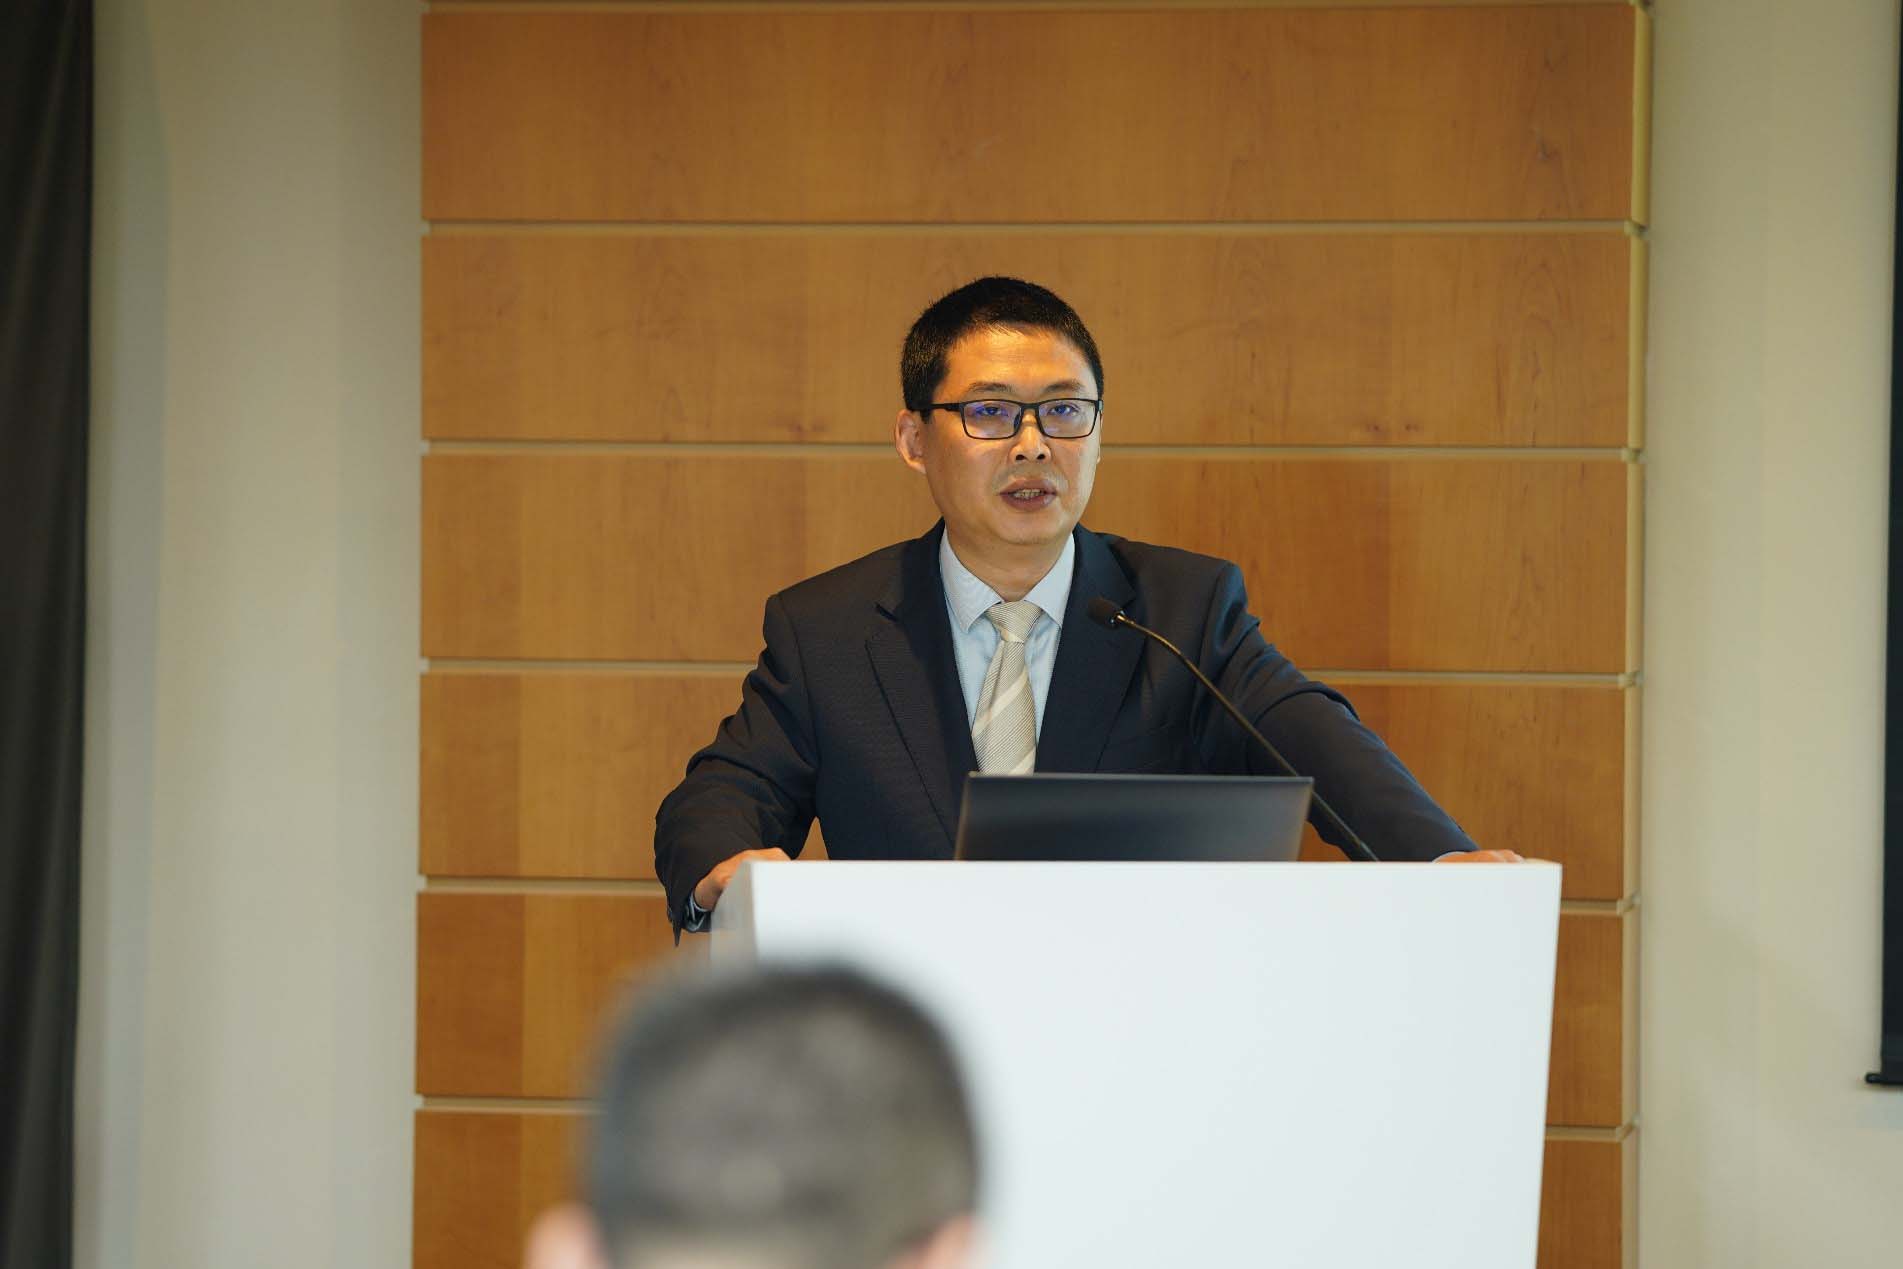 Shawn Zhao, President of the Campus Network Domain, Huawei's Data Communication Product Line, delivering an insightful speech